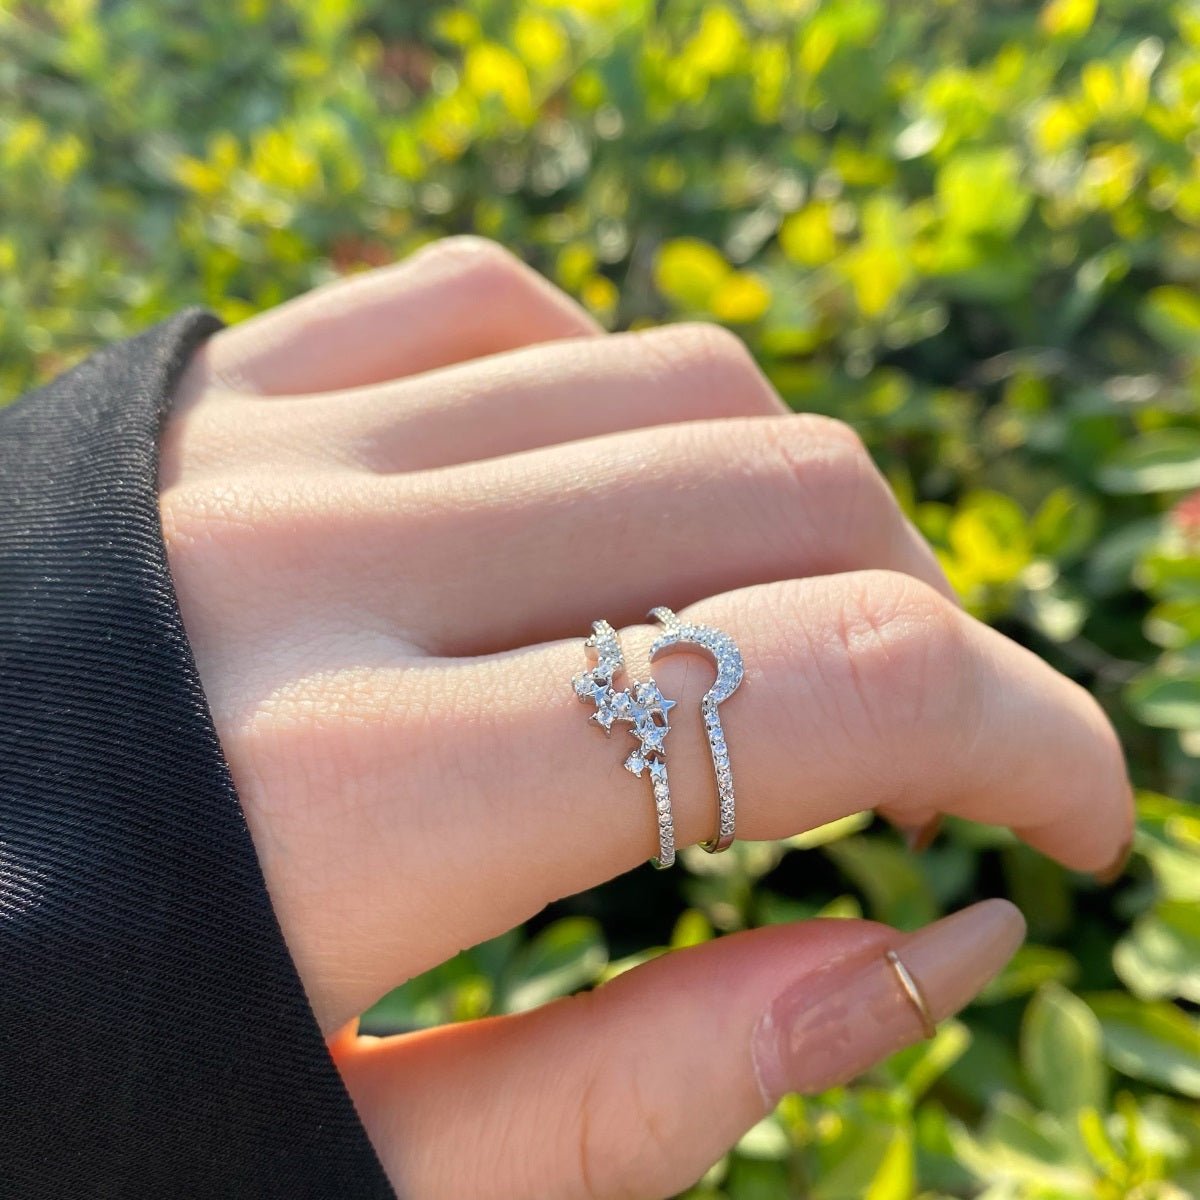 Women's Silver - Friendship rings Moon & Stars - A Pair Of Rings - Jewelry - EM Accessories - 925 silver - new - SILVER-0016-6-RING